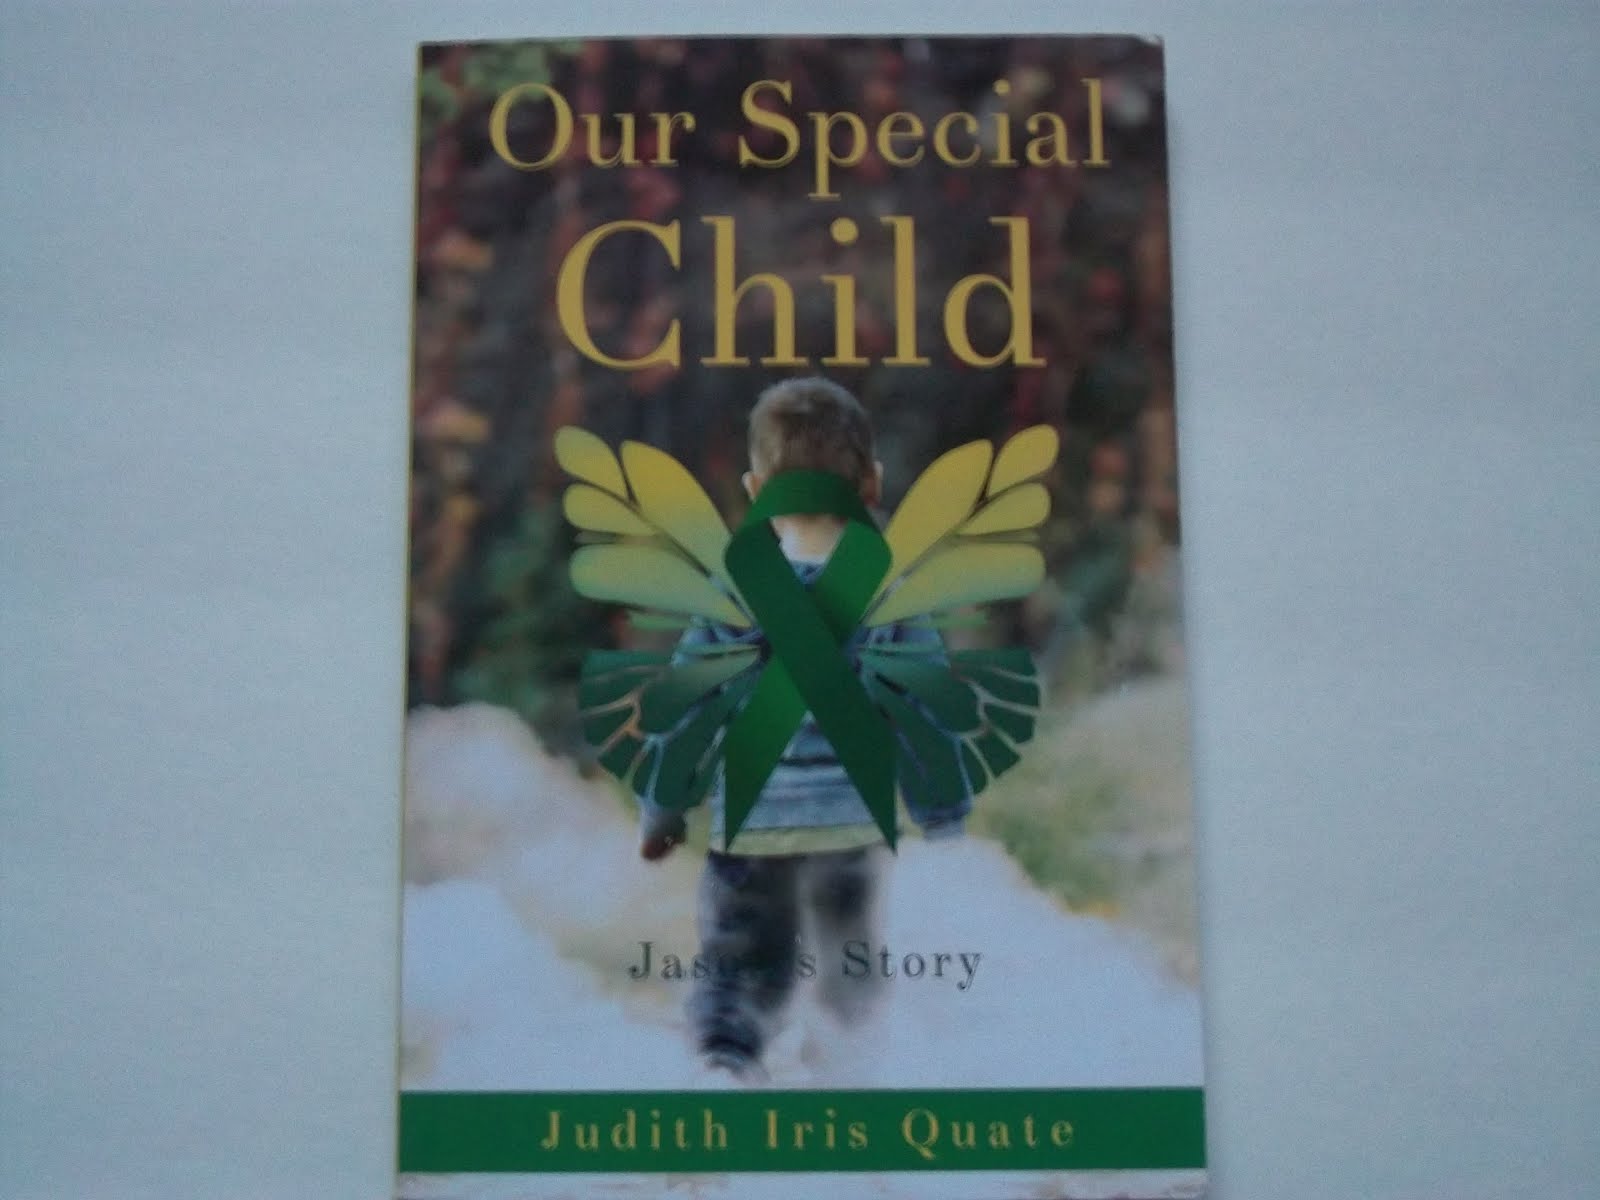 'OUR SPECIAL  CHILD' JASON'S STORY BY JUDITH IRIS QUATE